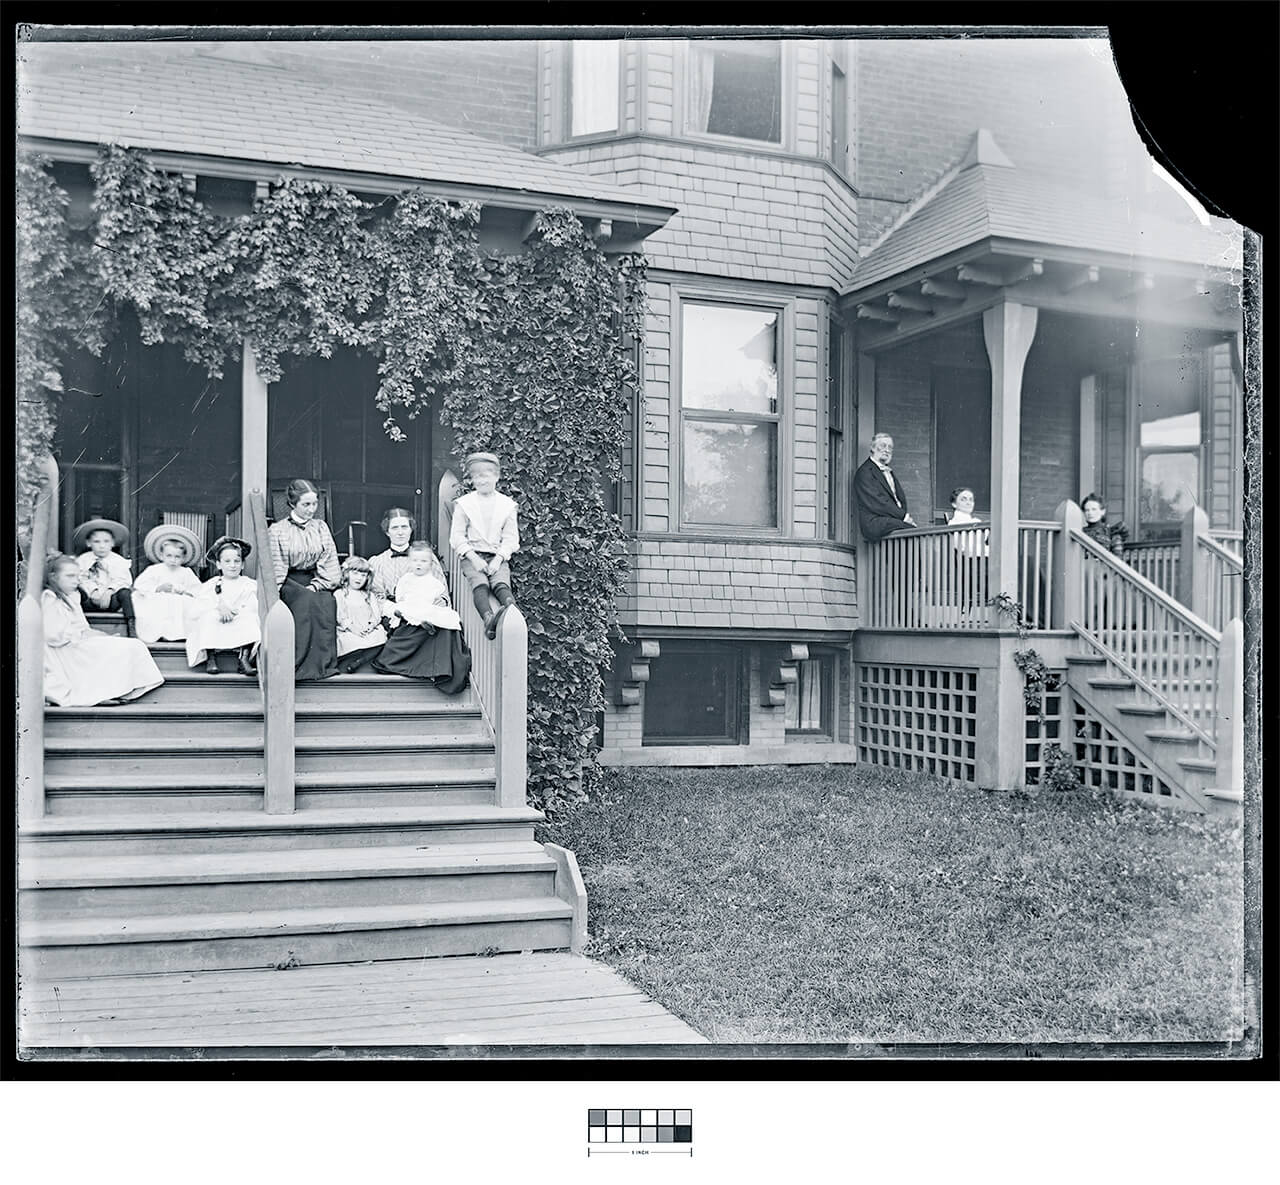 IMAGE and TEXT: The Pullman Neighborhood - Group of people sitting on front stoop section image